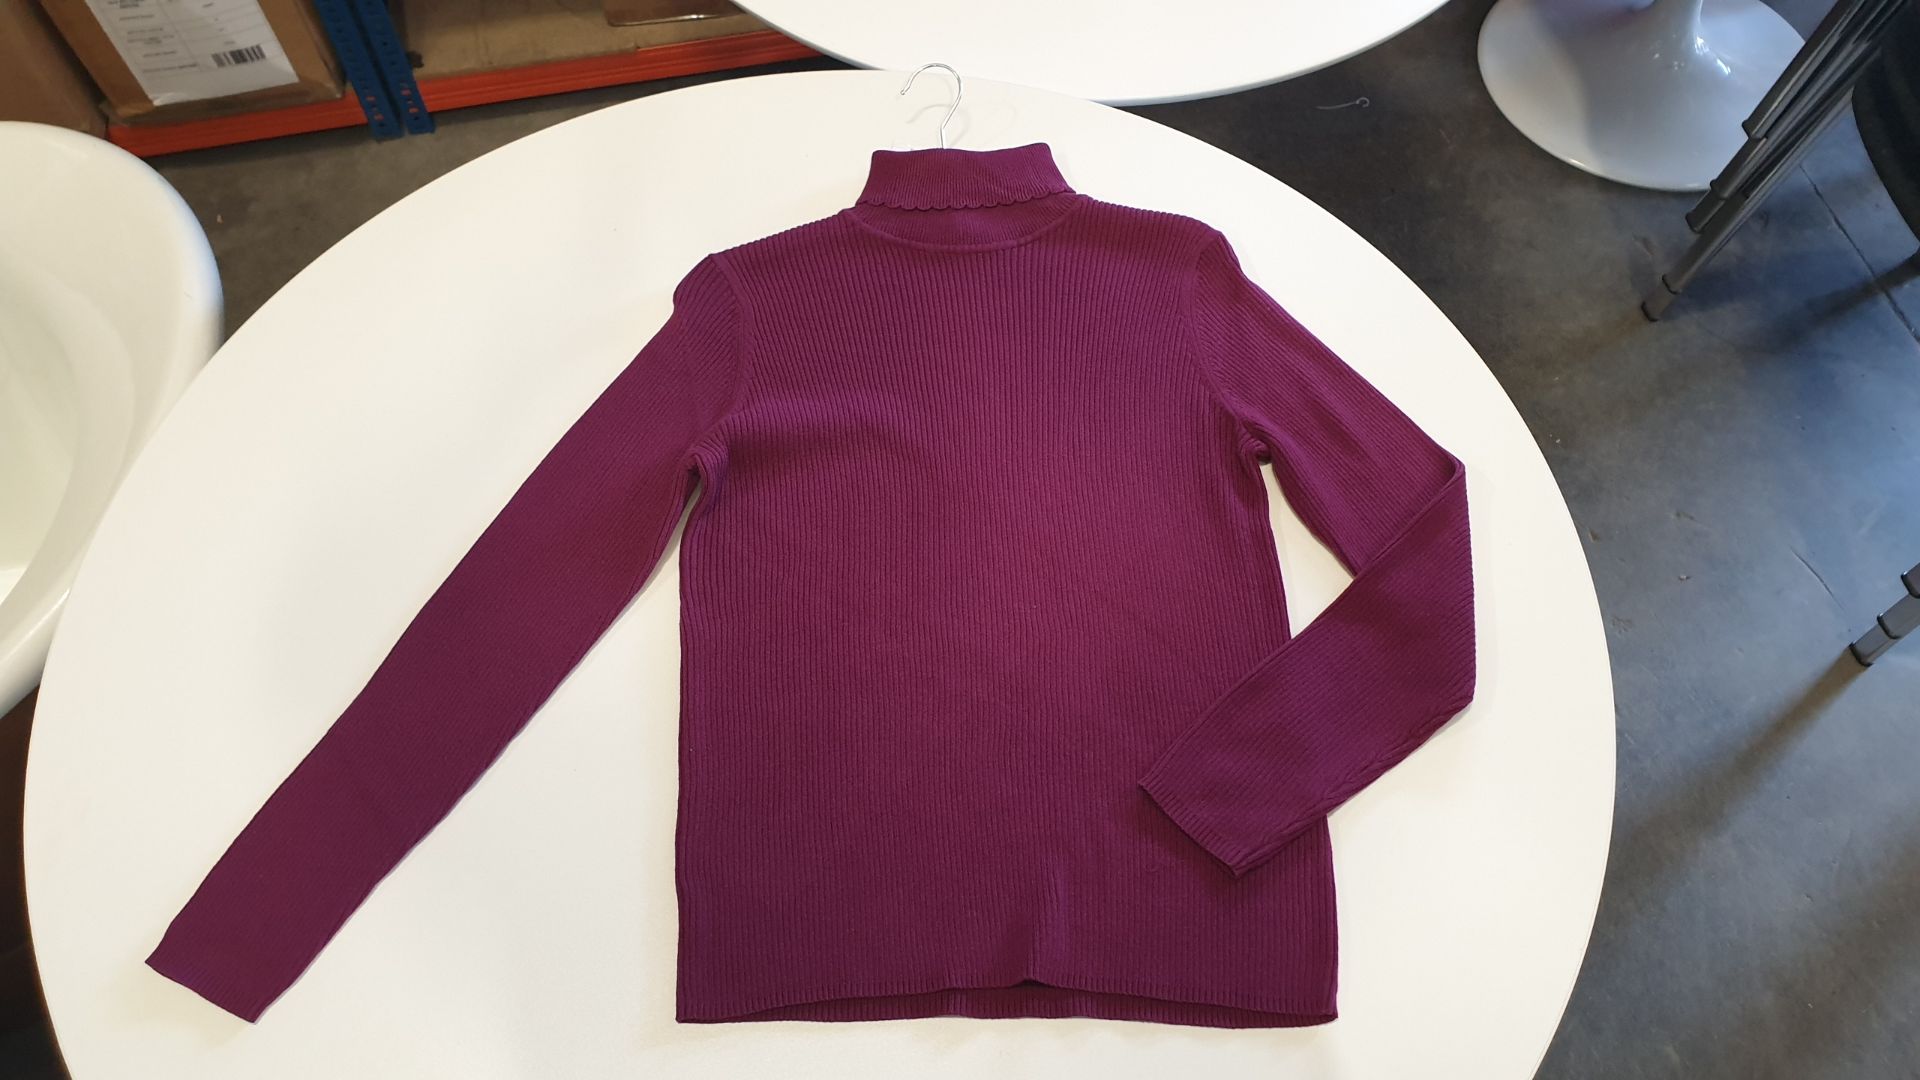 30 X BRAND NEW GEORGE TURTLE NECK KIDS JUMPER MAROON 20 X SIZE 11 - 12 AND 10 X 10 - 11 YEARS